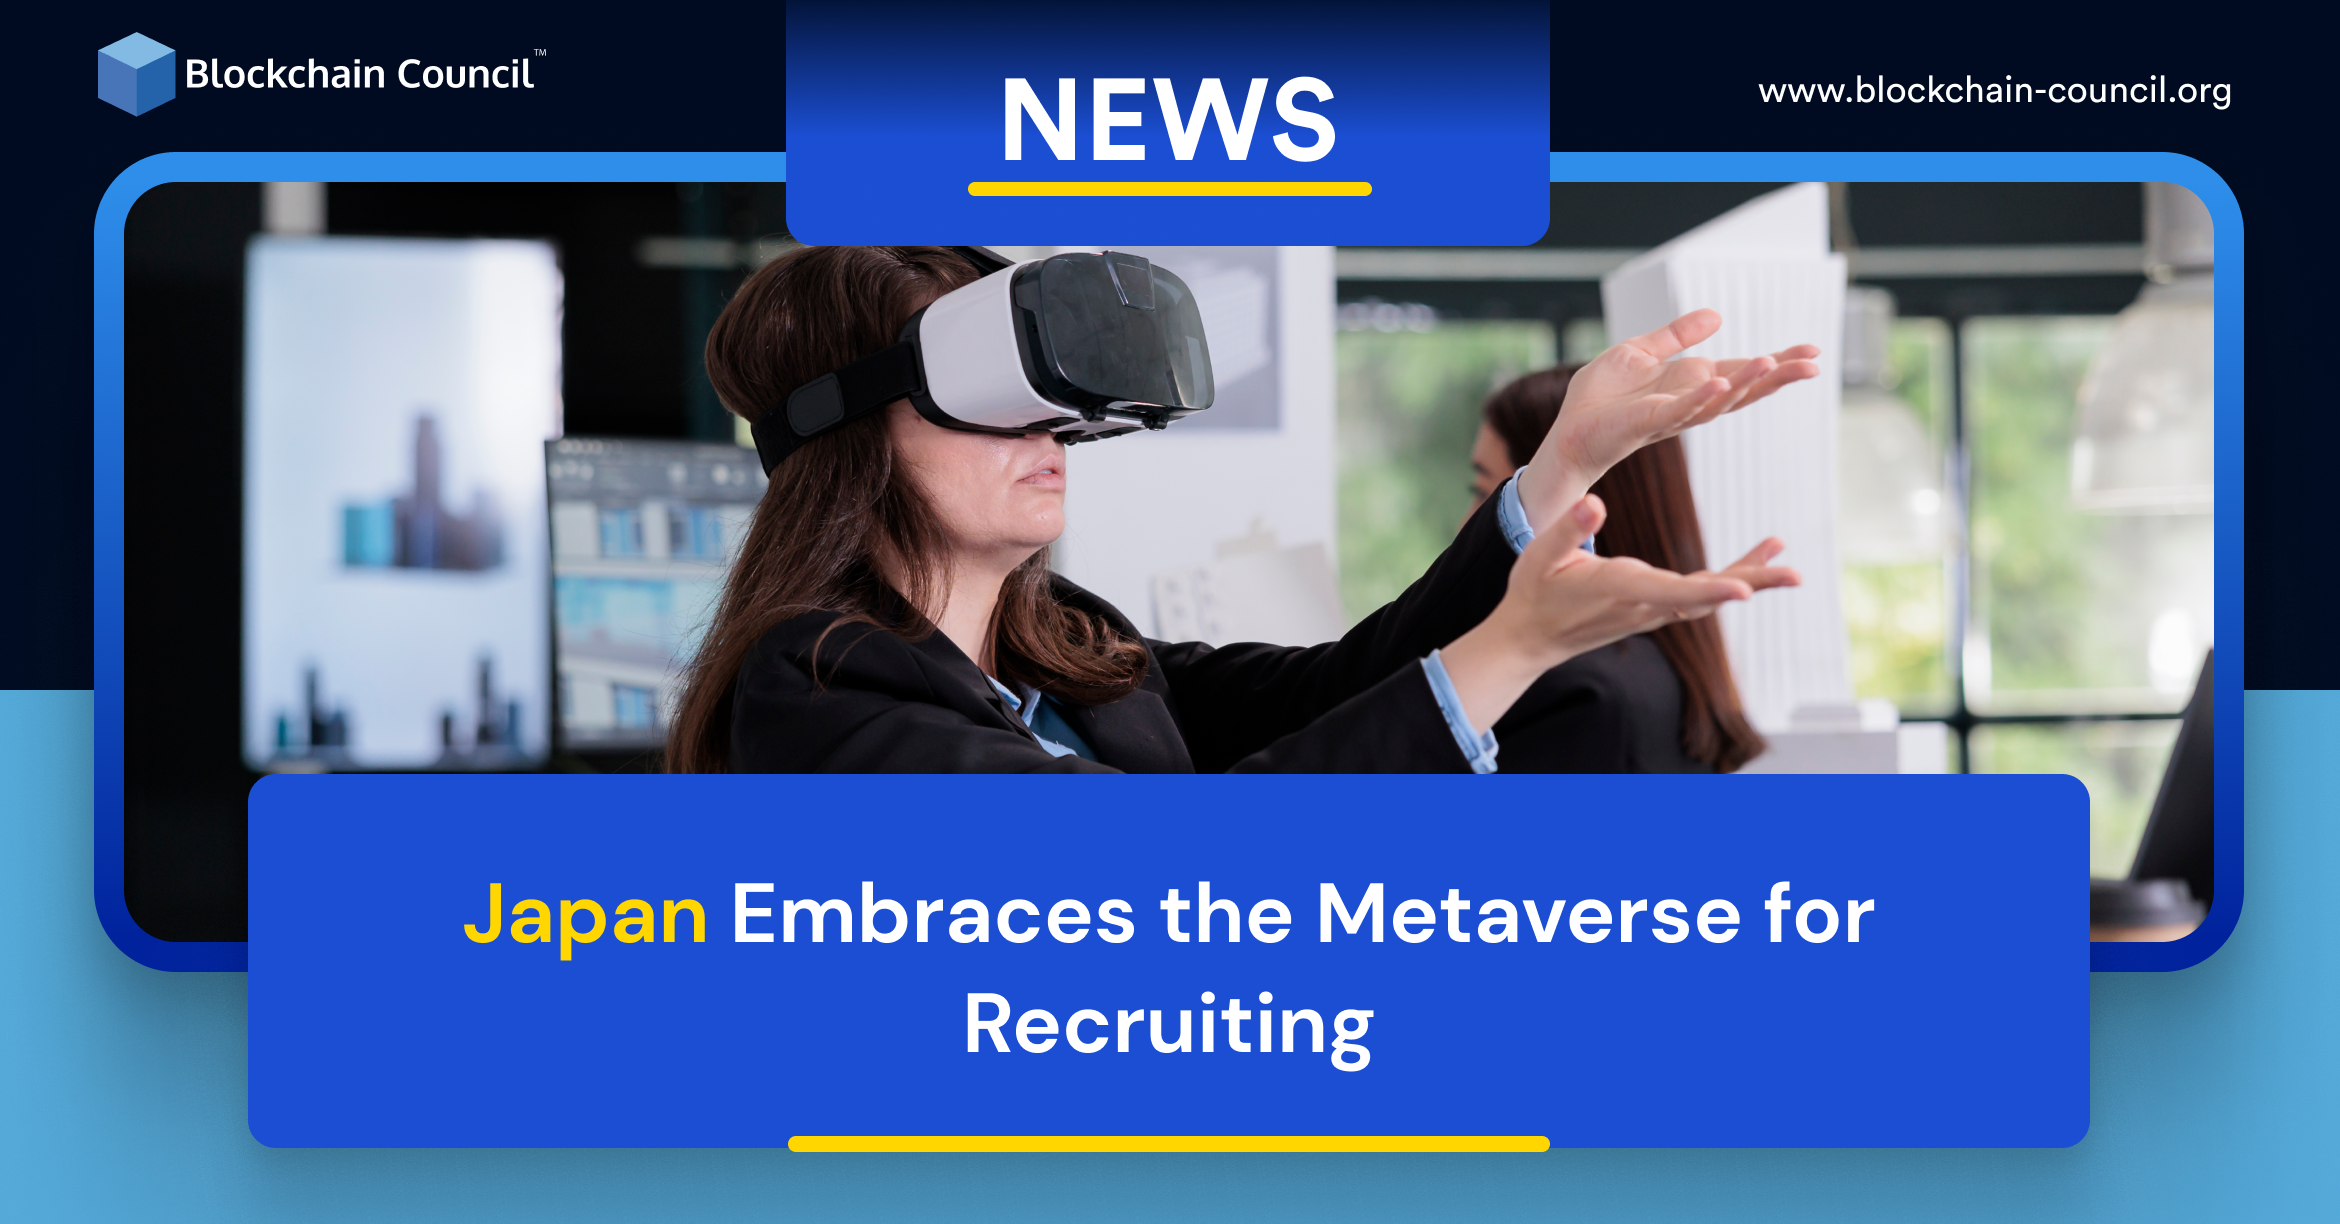 Japan Embraces the Metaverse for Recruiting